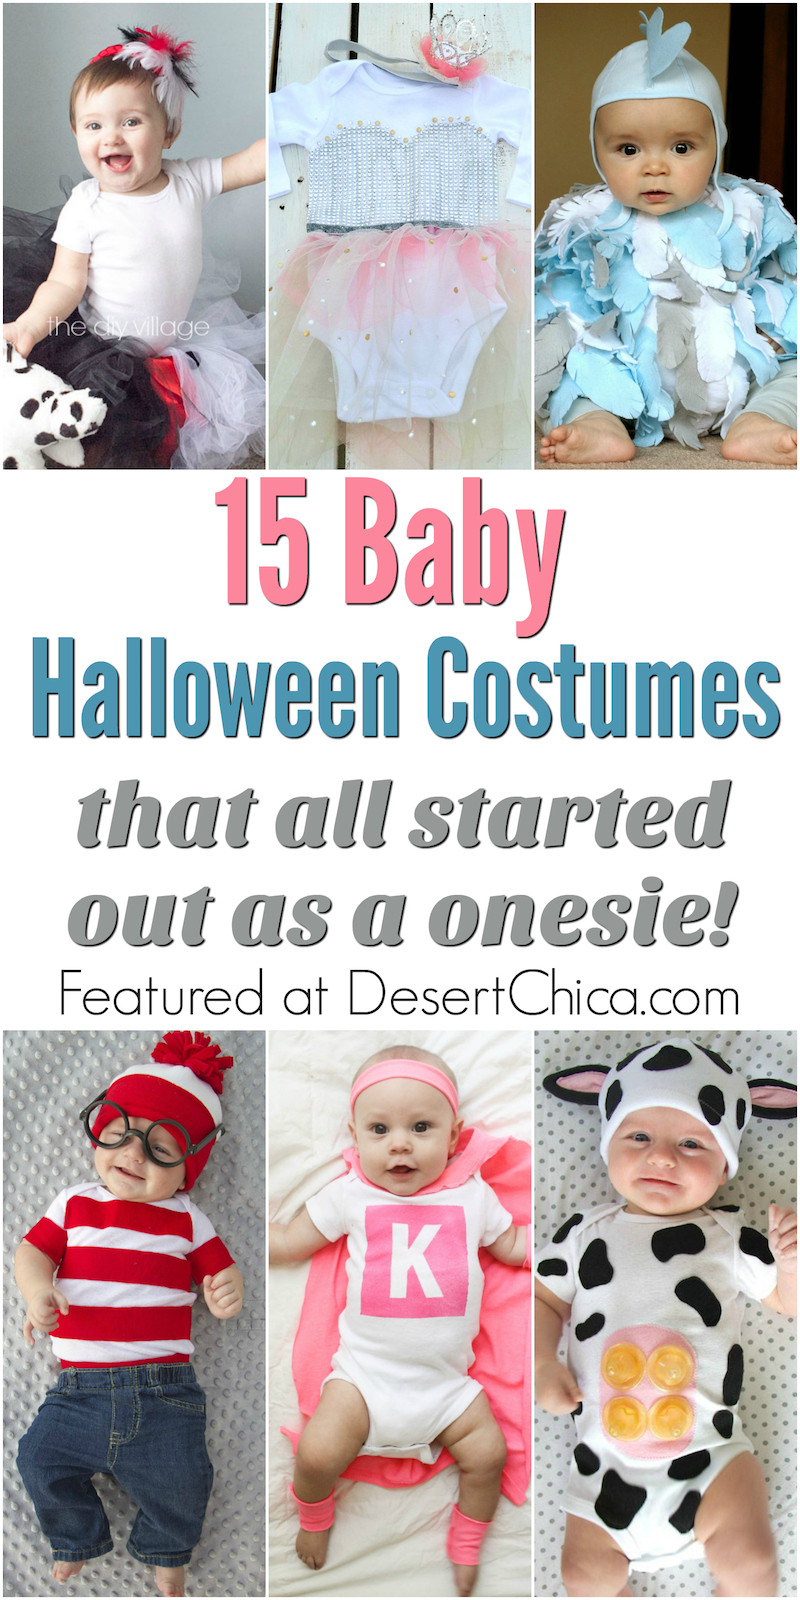 DIY Halloween Costume For Baby
 15 esie Costumes for Babies